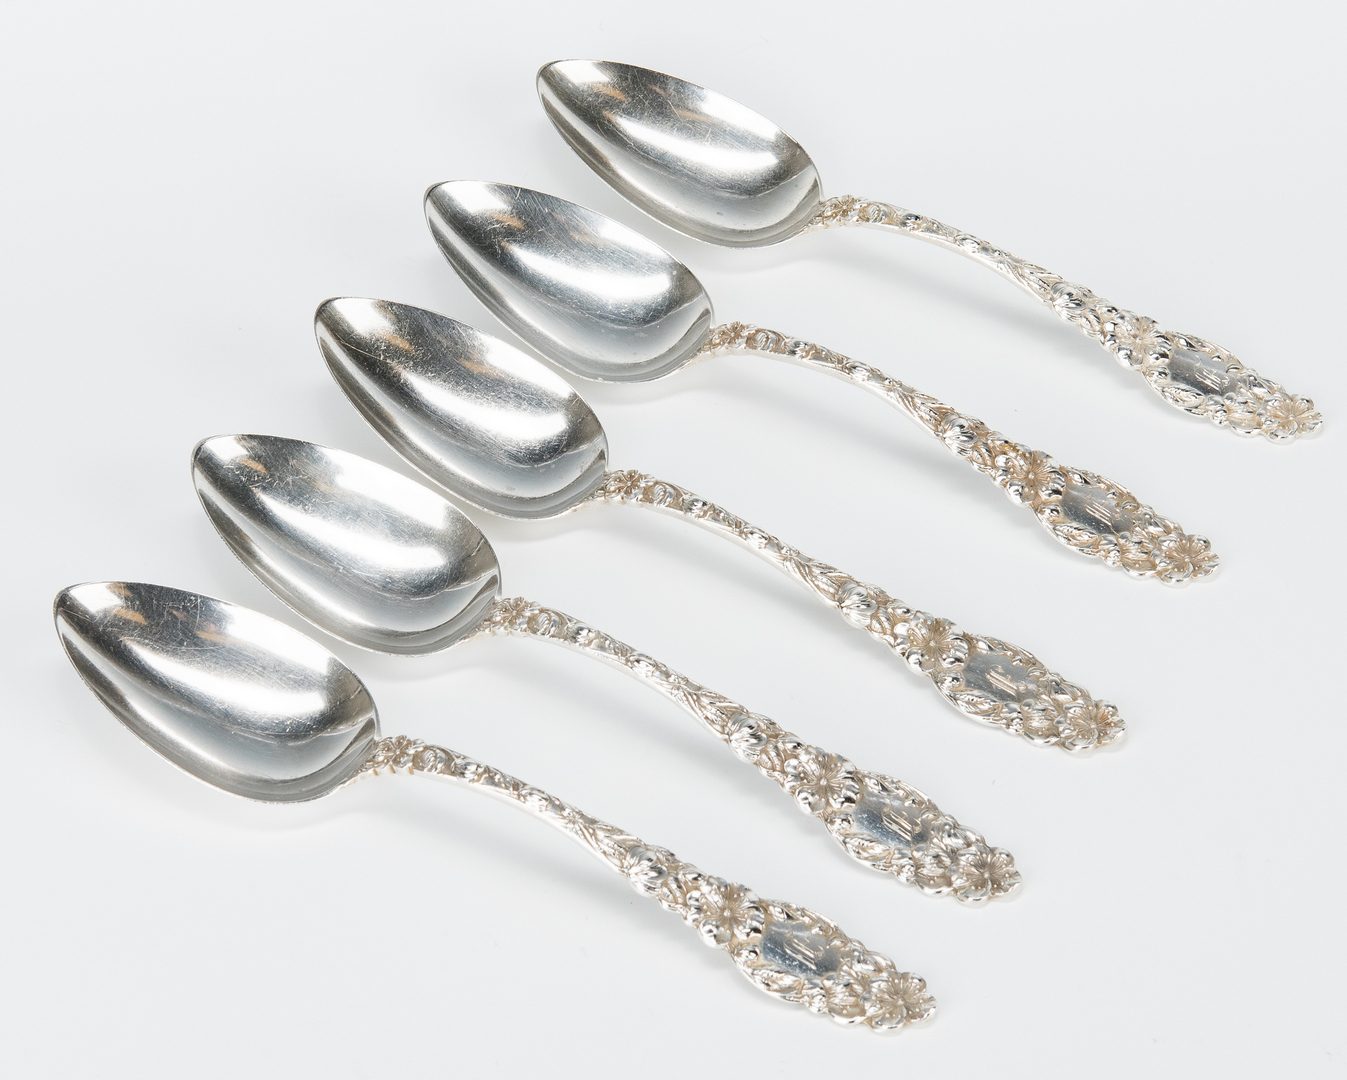 Lot 40: Dominick & Haff Blossom Sterling Flatware + 1 other, Hope Brothers Retailers, TN